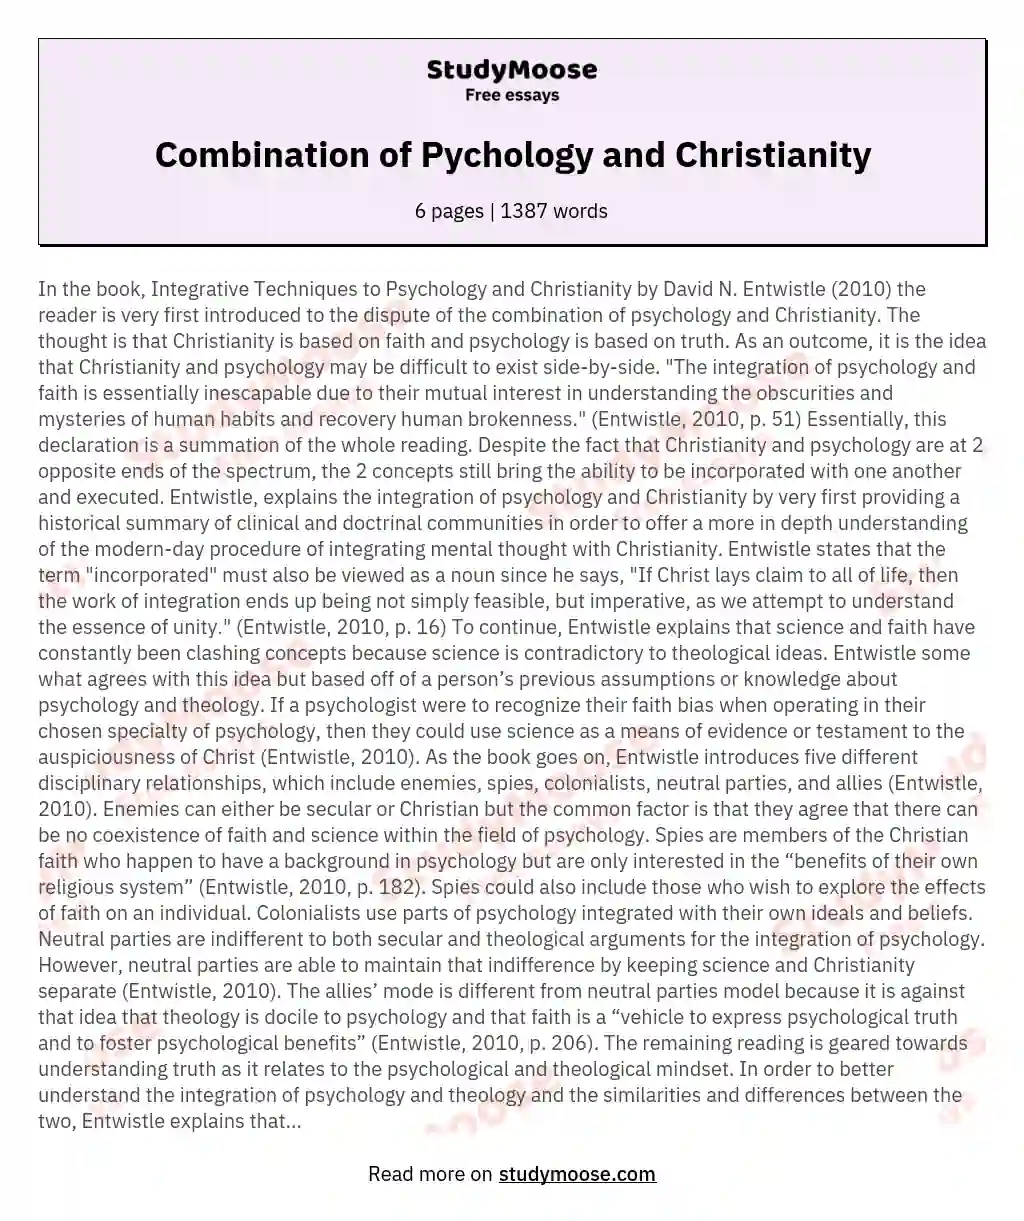 Combination of Pychology and Christianity essay